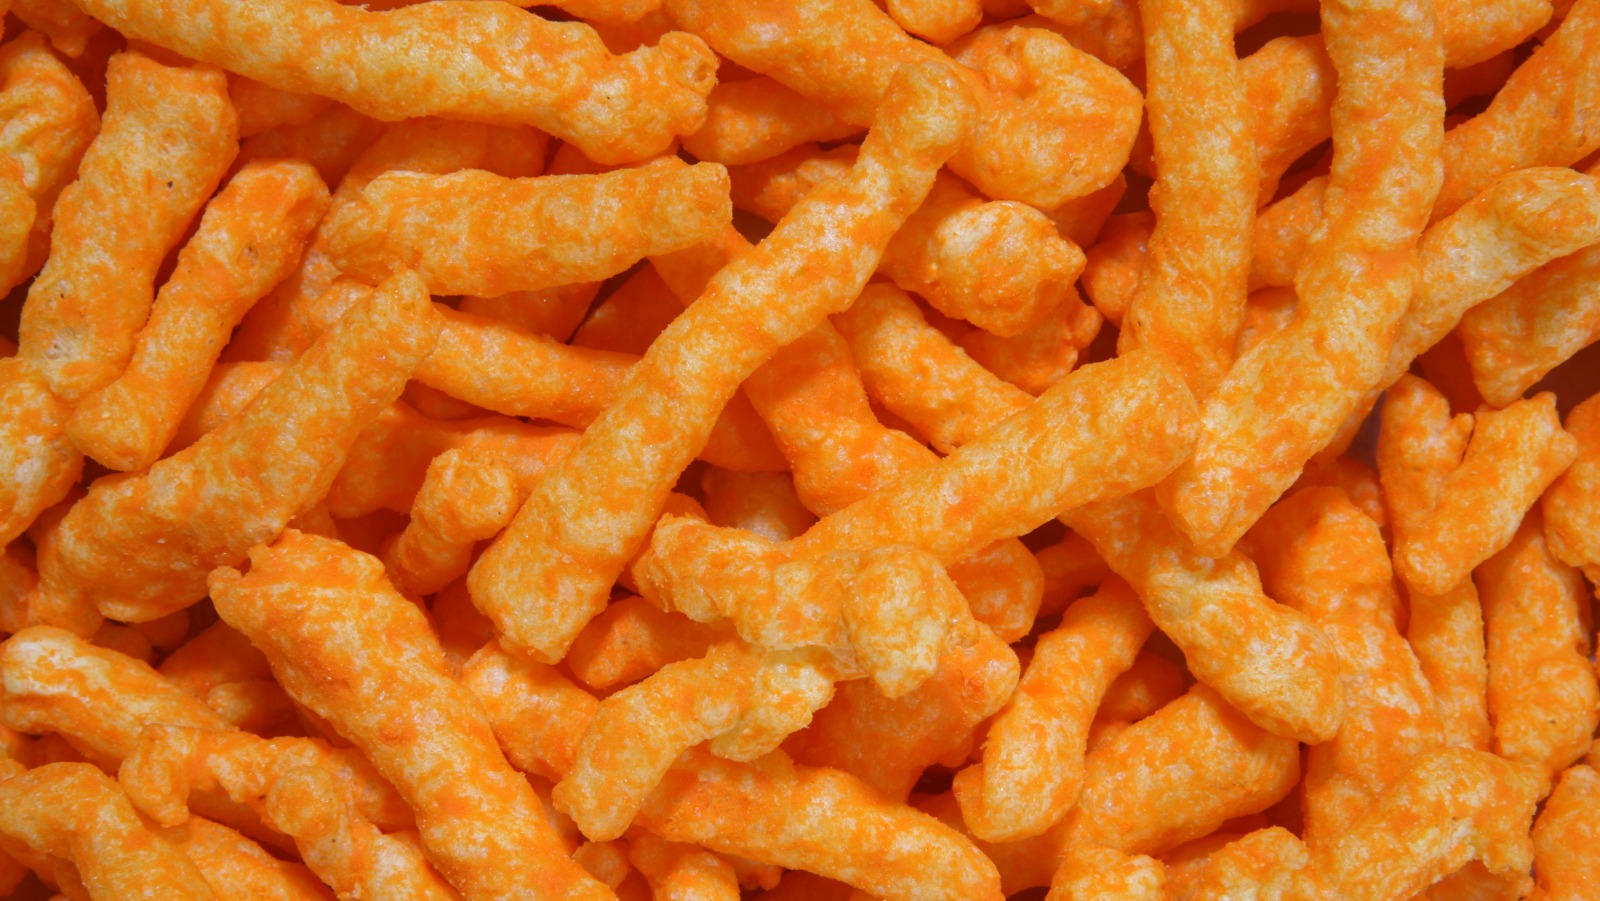 Baked Cheetos For Healthier Snacking At The Office